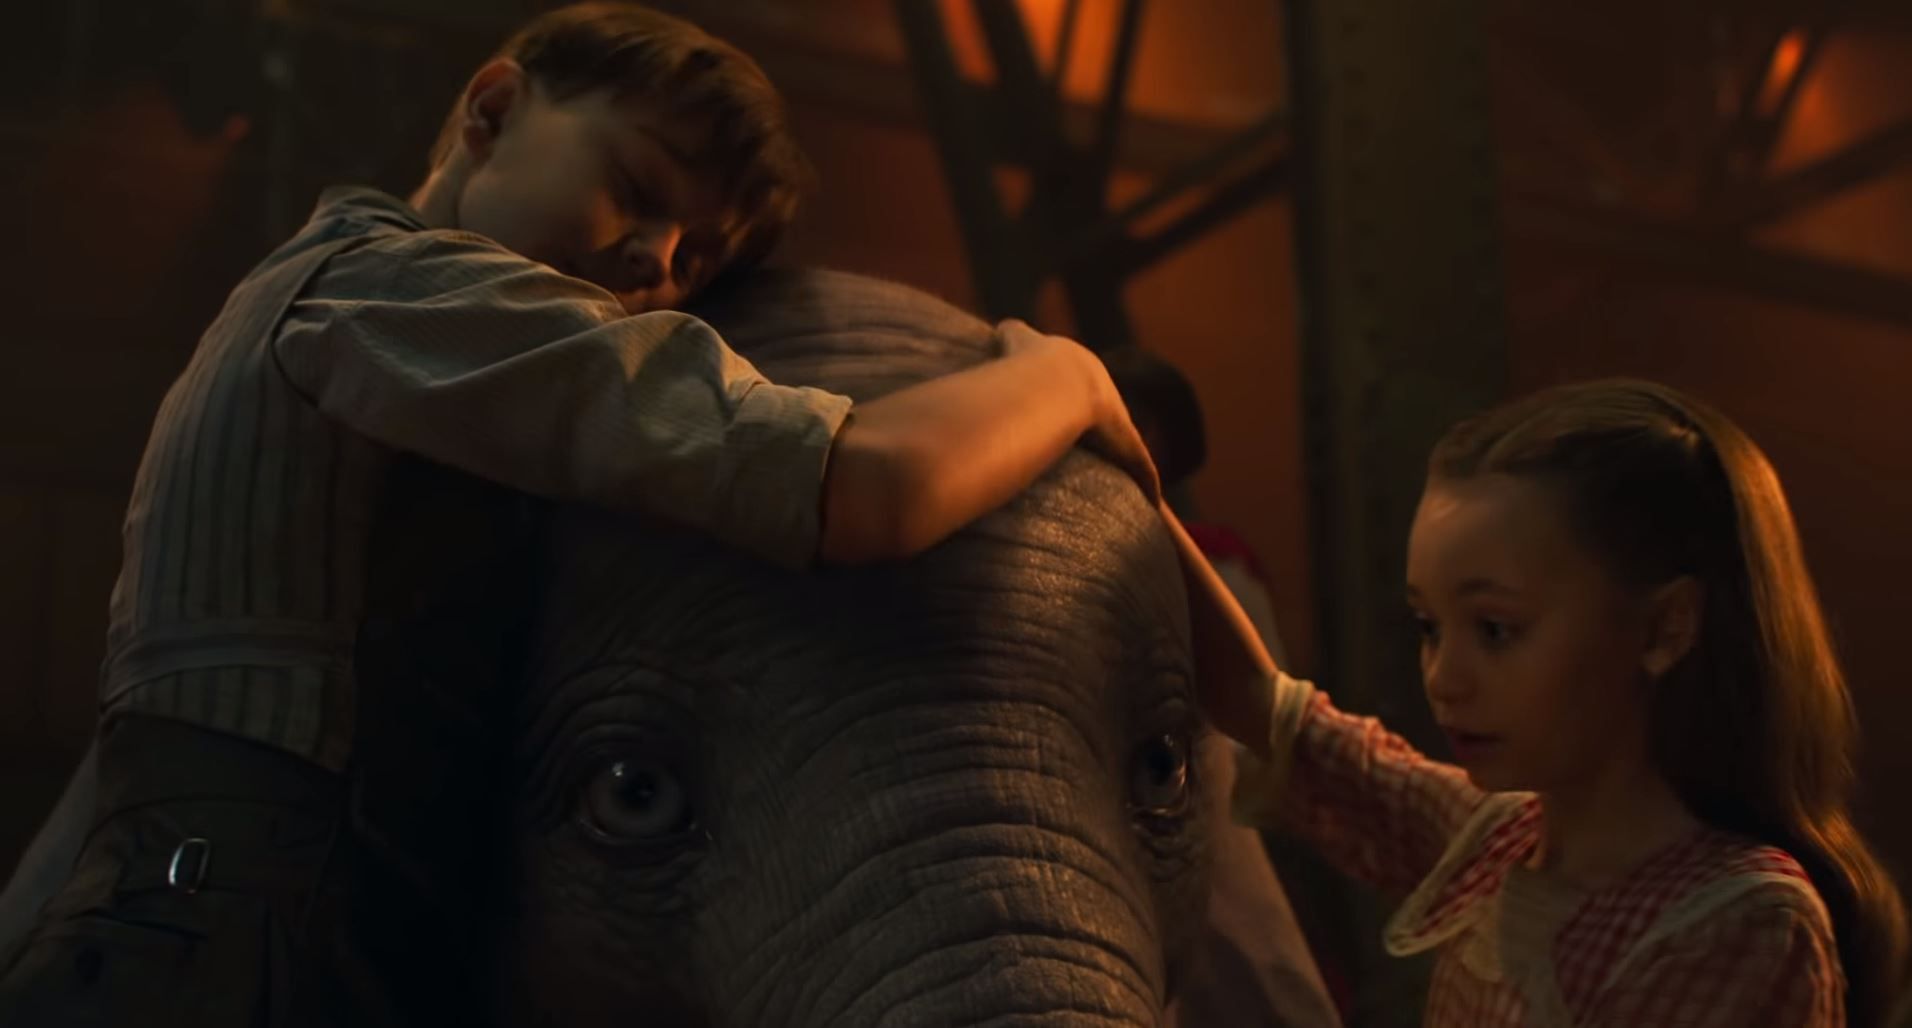 Disney Released The First Trailer For 'Dumbo' And We're All Ready To See An Elephant Fly